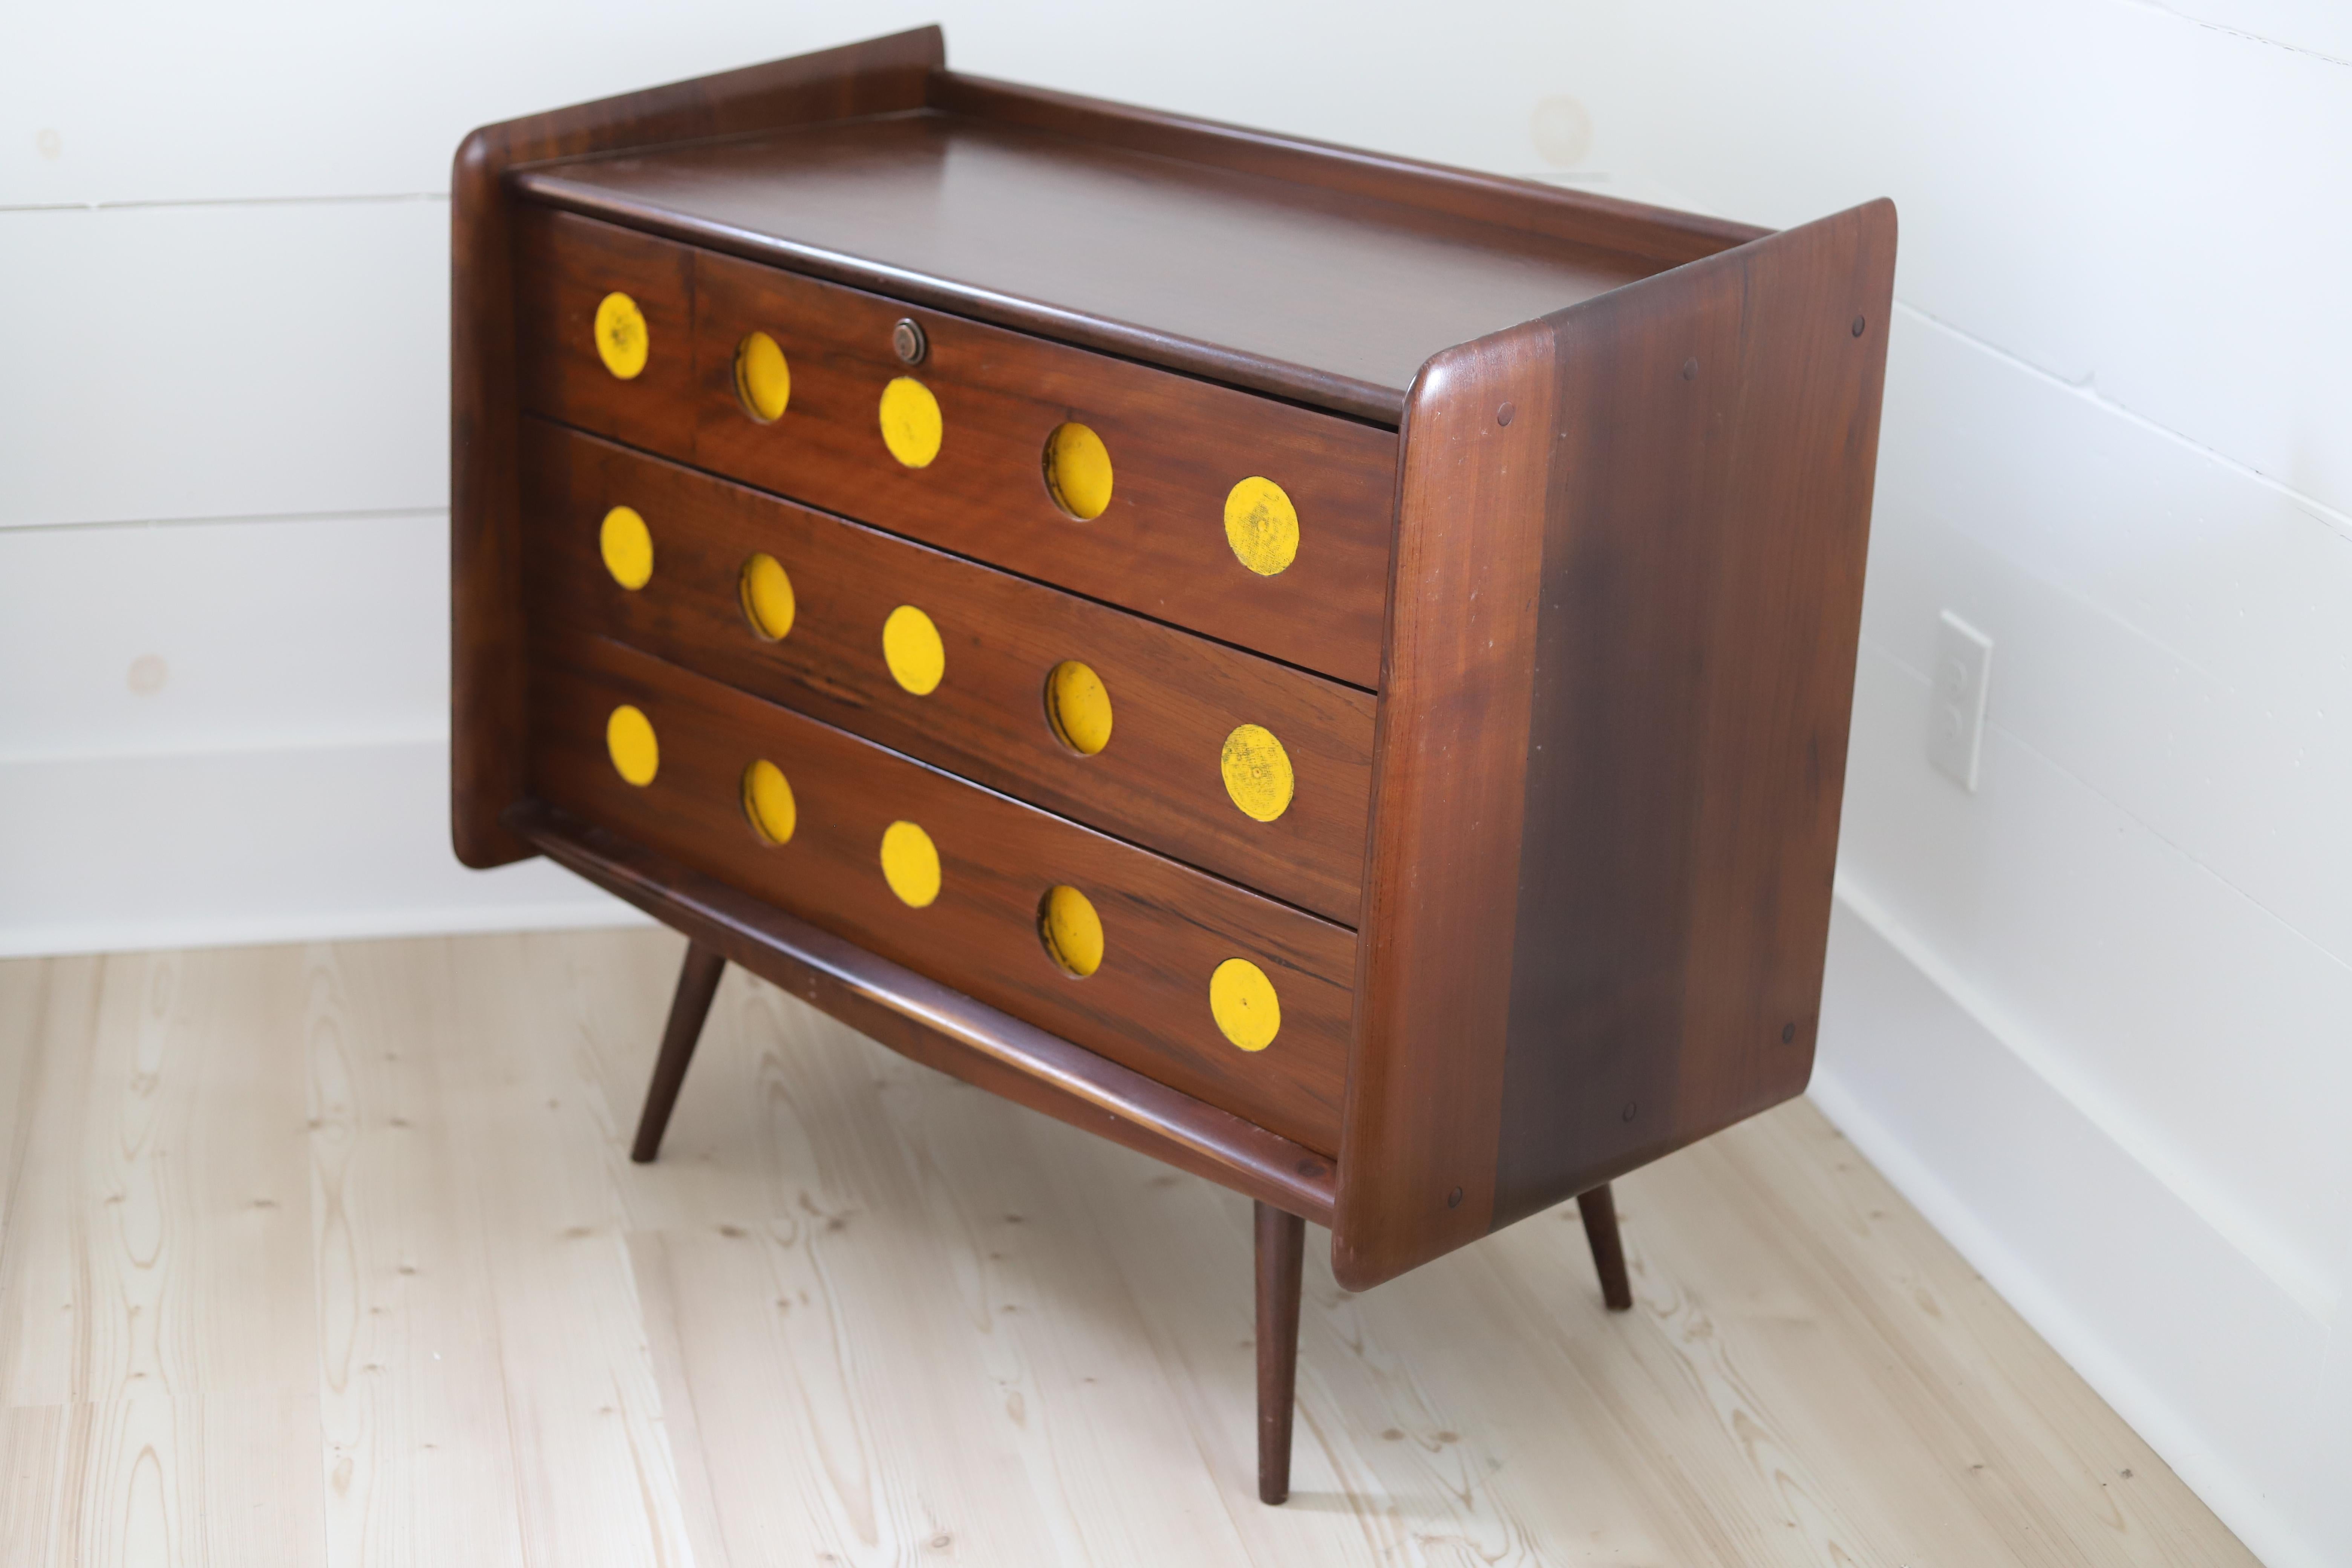 Metal Cimo Moveis, Sideboard / Credenza- Brazilian Mid-Century Modern - 60' For Sale